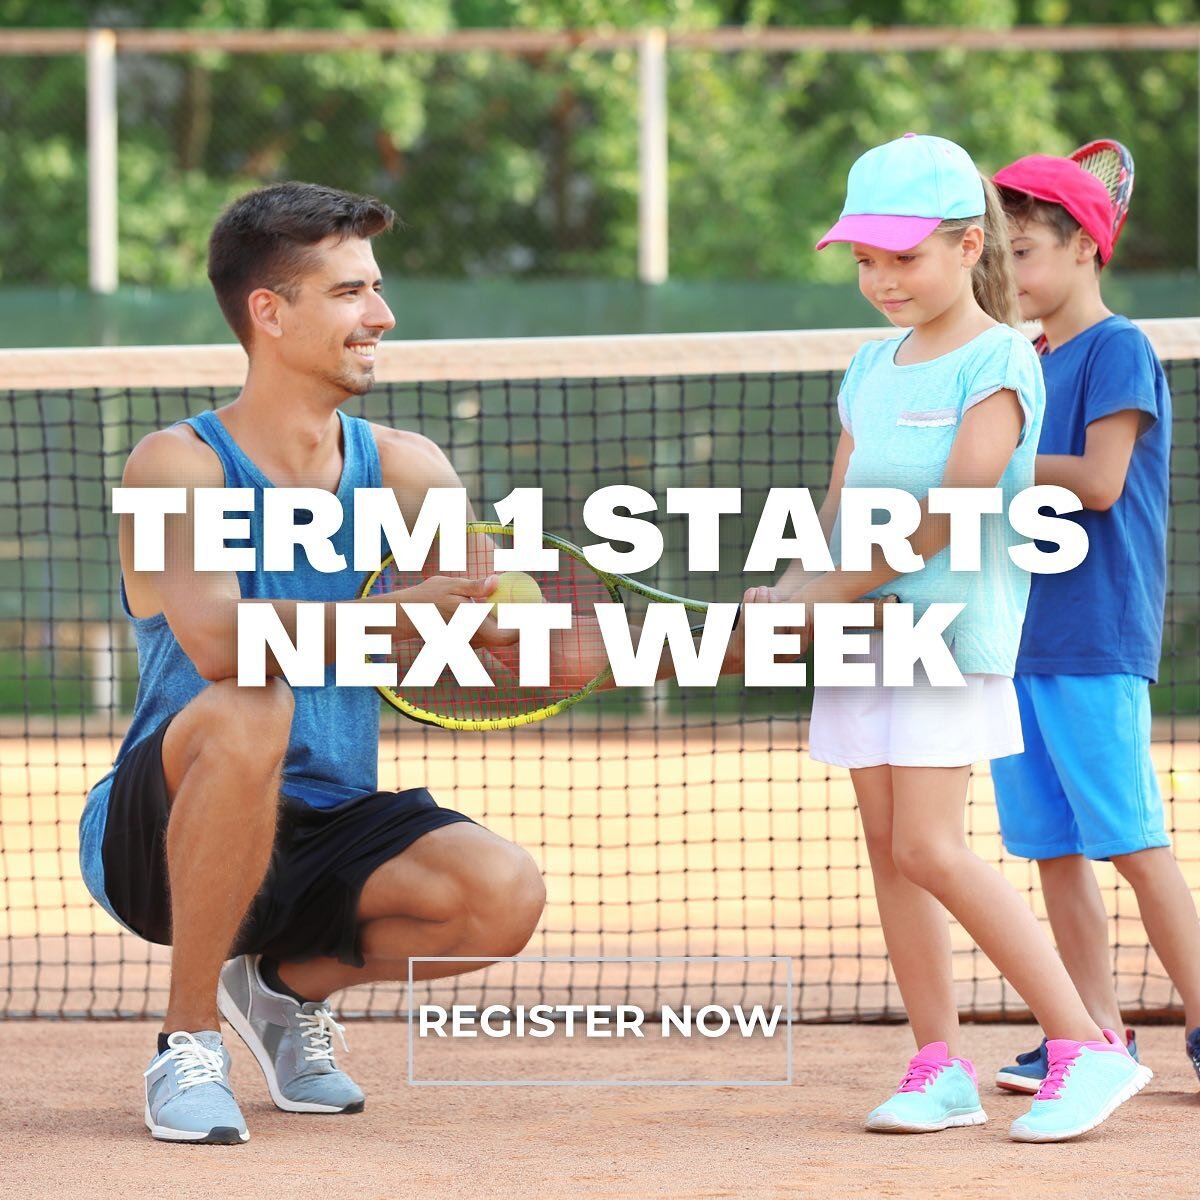 TERM 1 IS LIVE ON THE WEBSITE ✅

🎾 All private lessons start next week
🎾 All groups &amp; school programs start week 2 

Link in bio